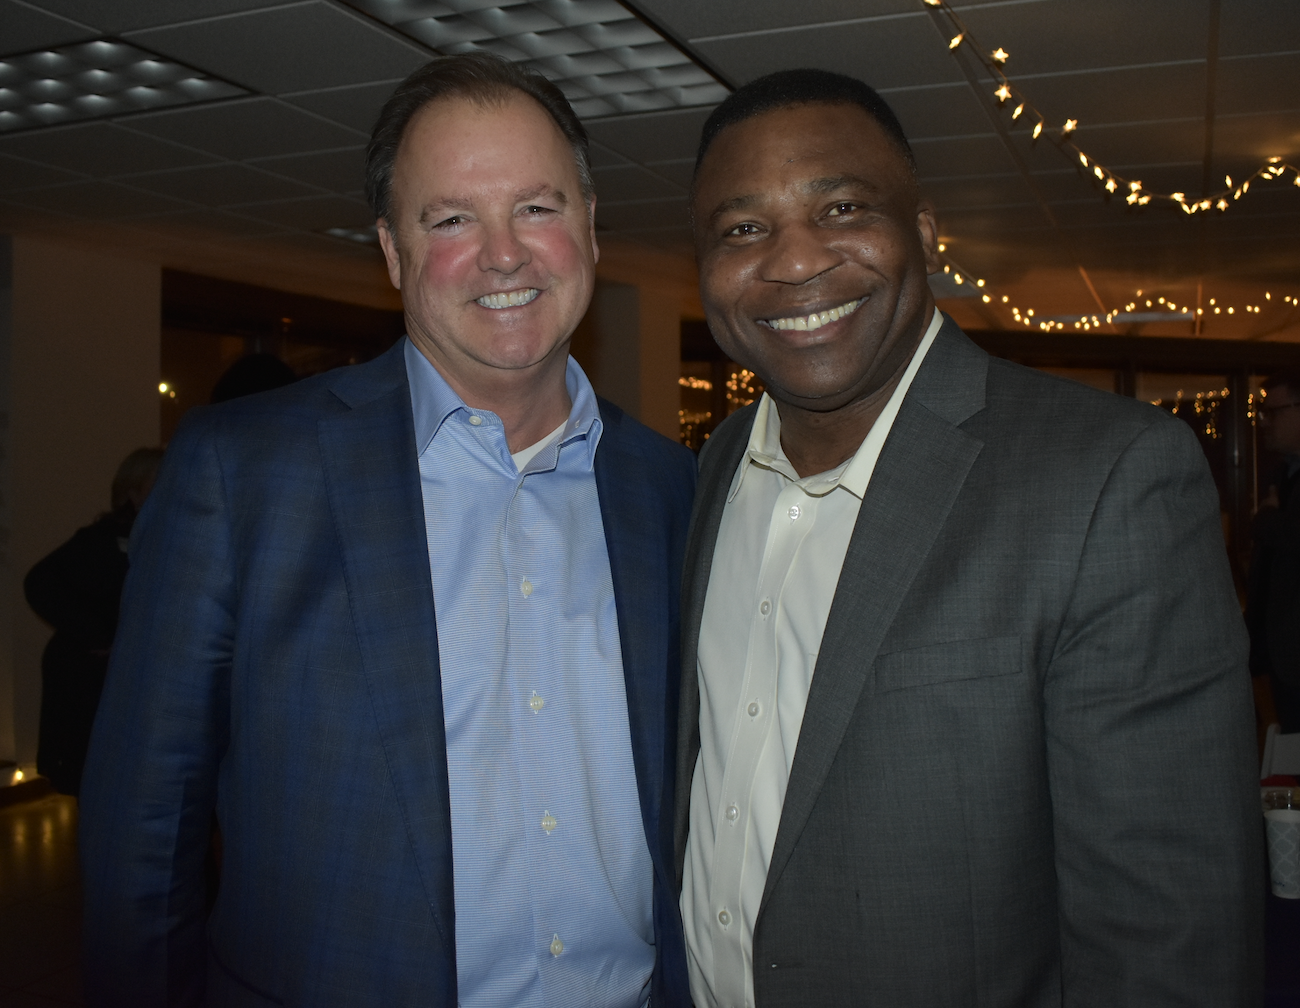 Dan Kiley (left), Chairman Of The Board at Arria NLG, and Evans Nwankwo, president and CEO of Megen Construction. (Photo provided)